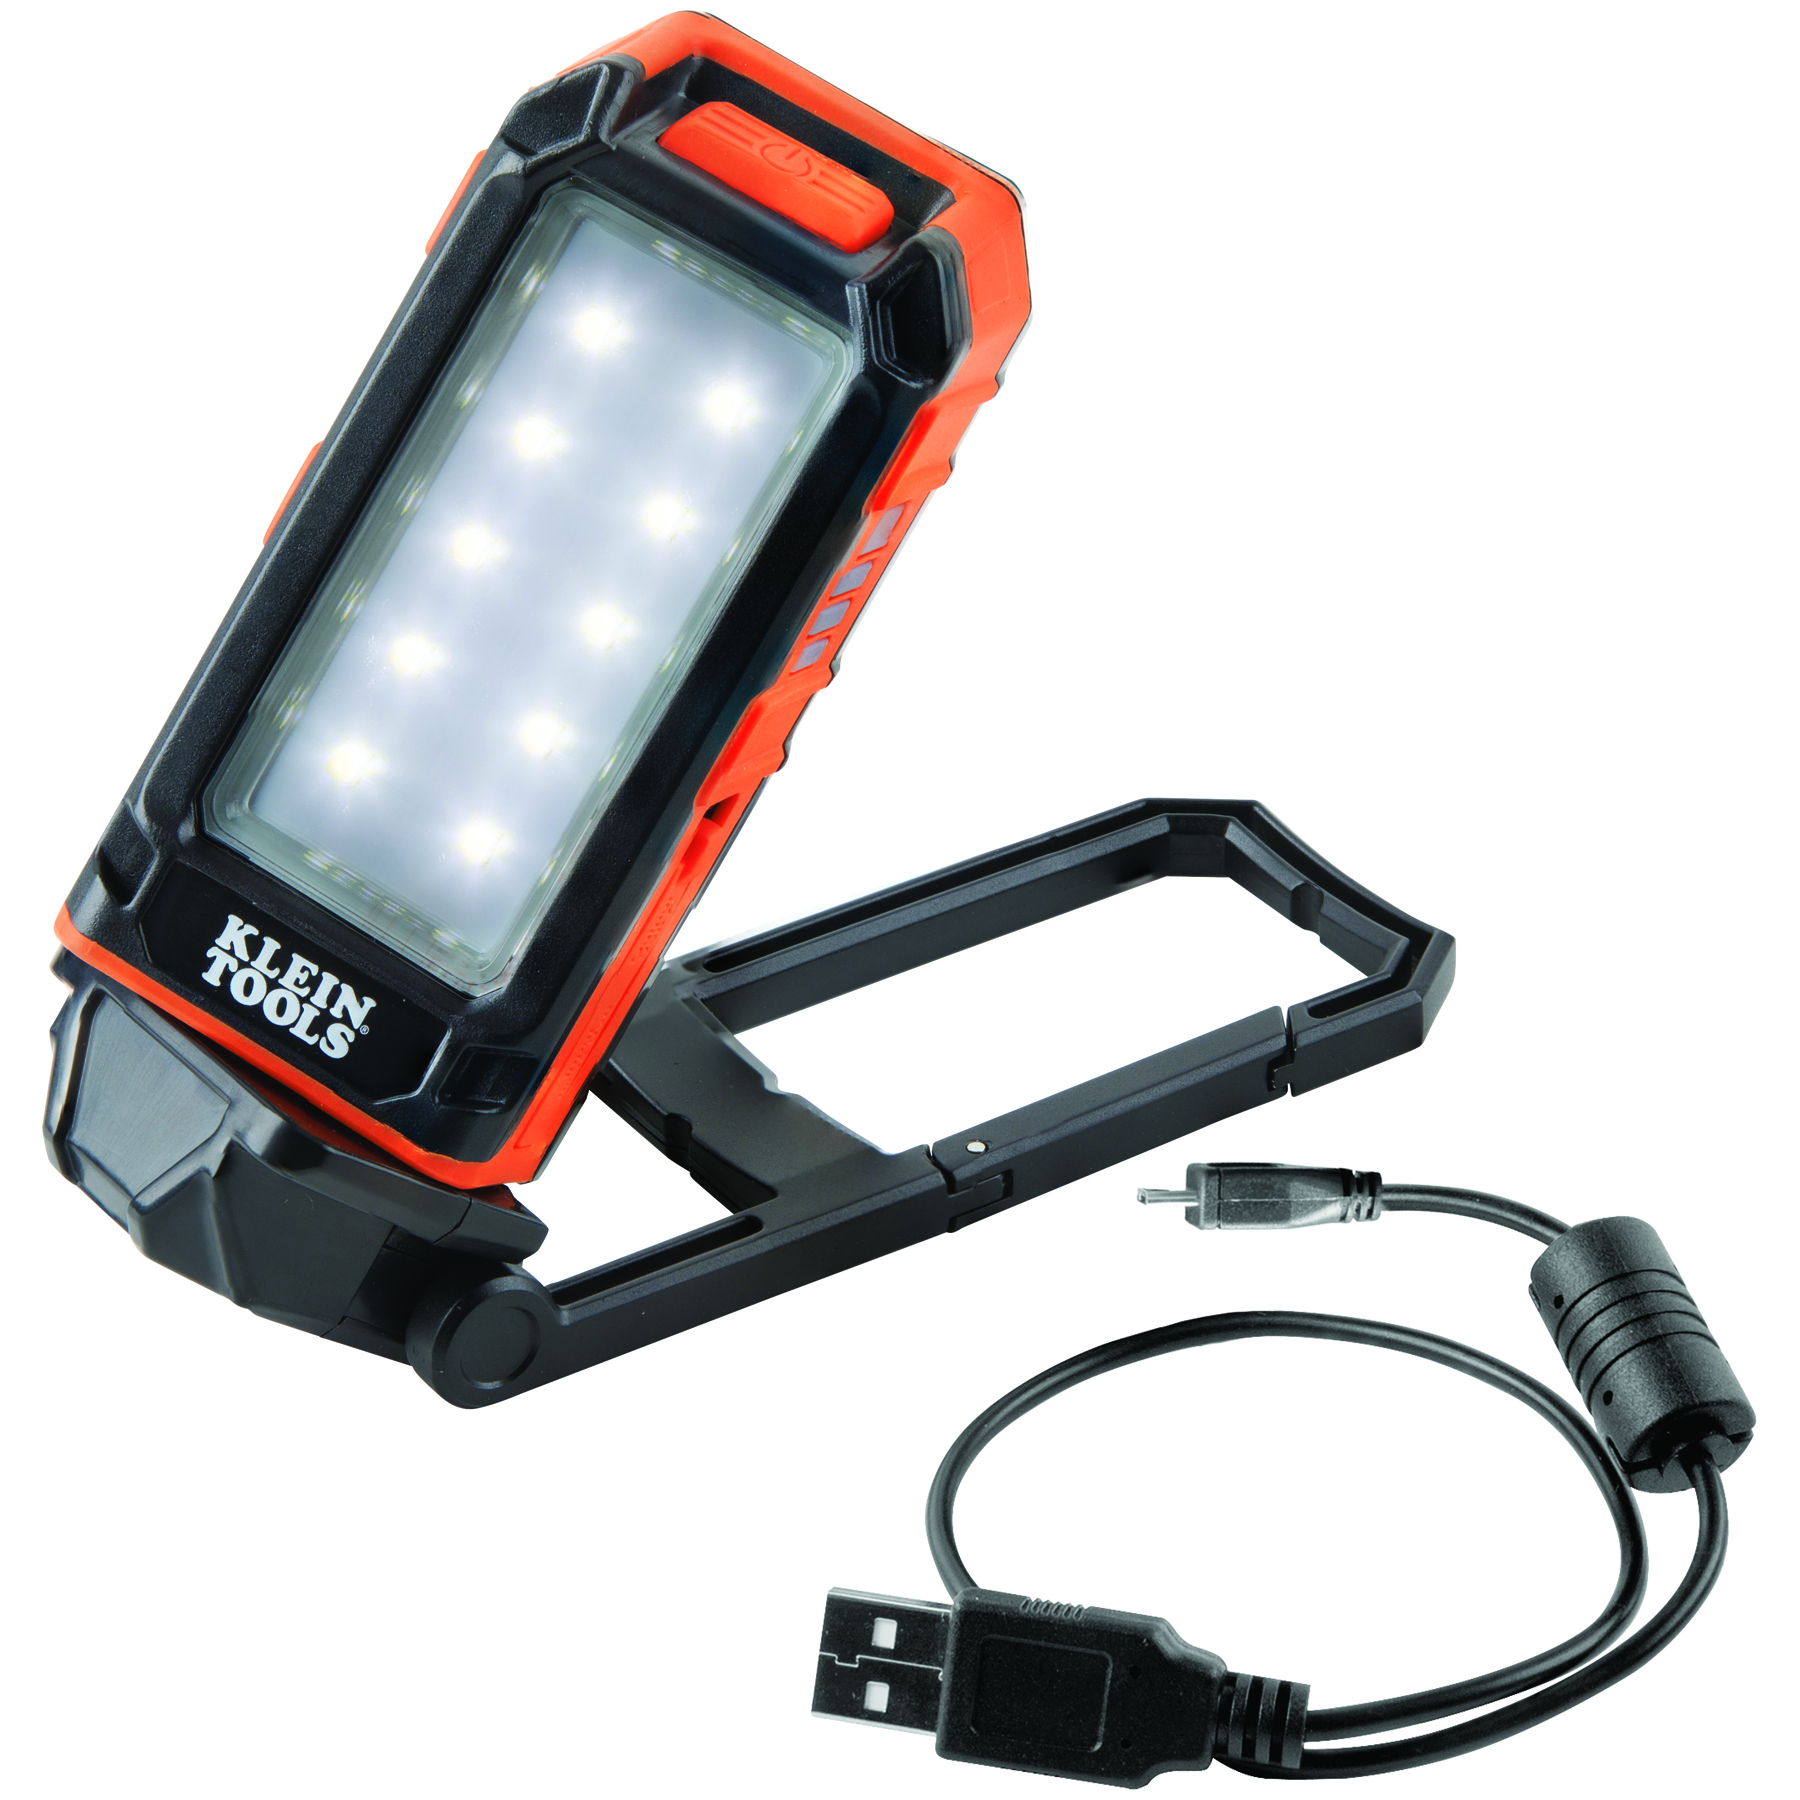 56403 LED Personal Rechargeable Worklight/Power bank